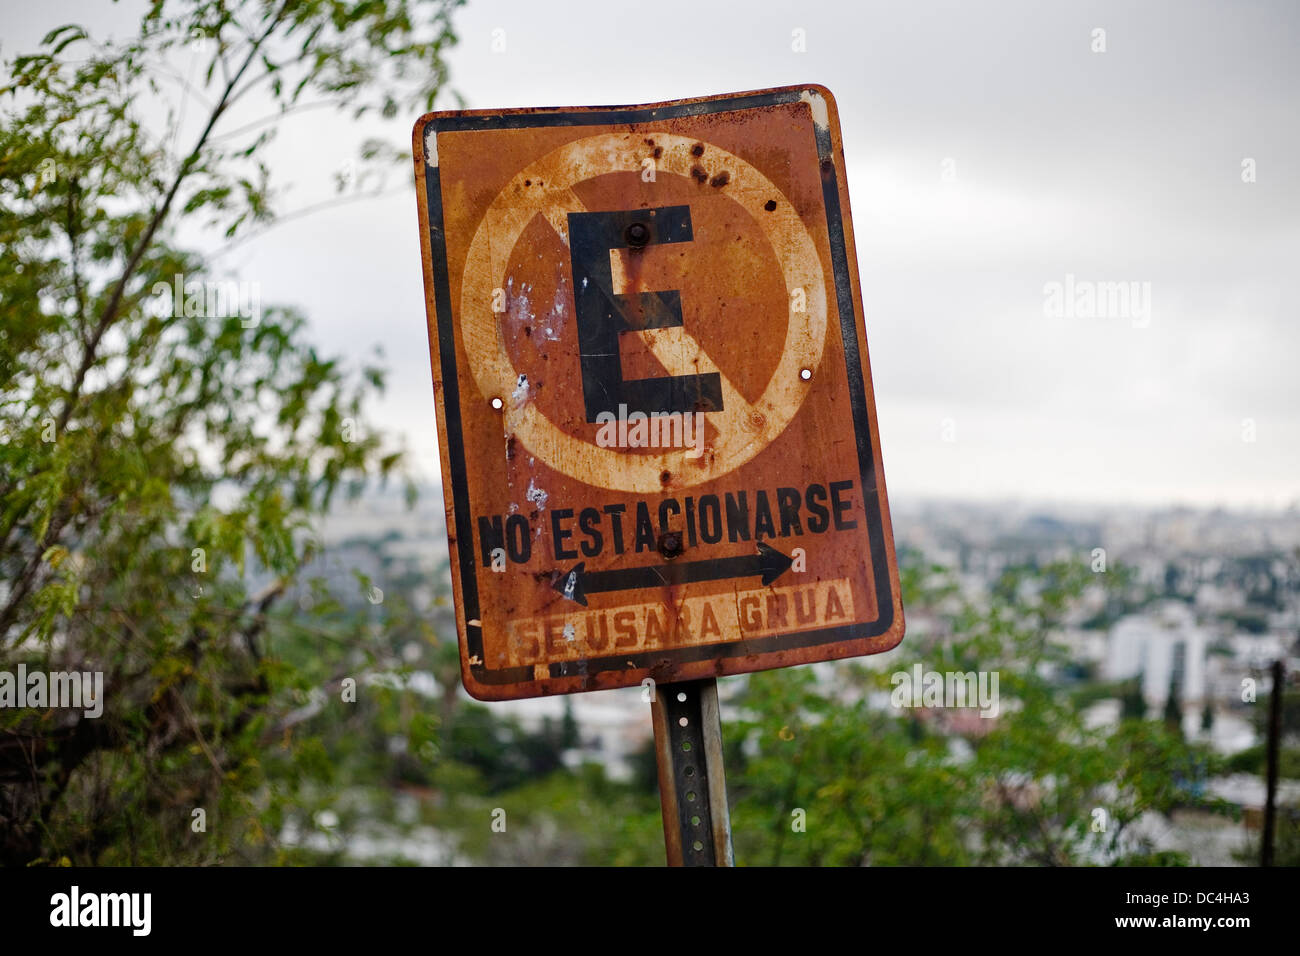 No parking sign in Spanish. Stock Photo